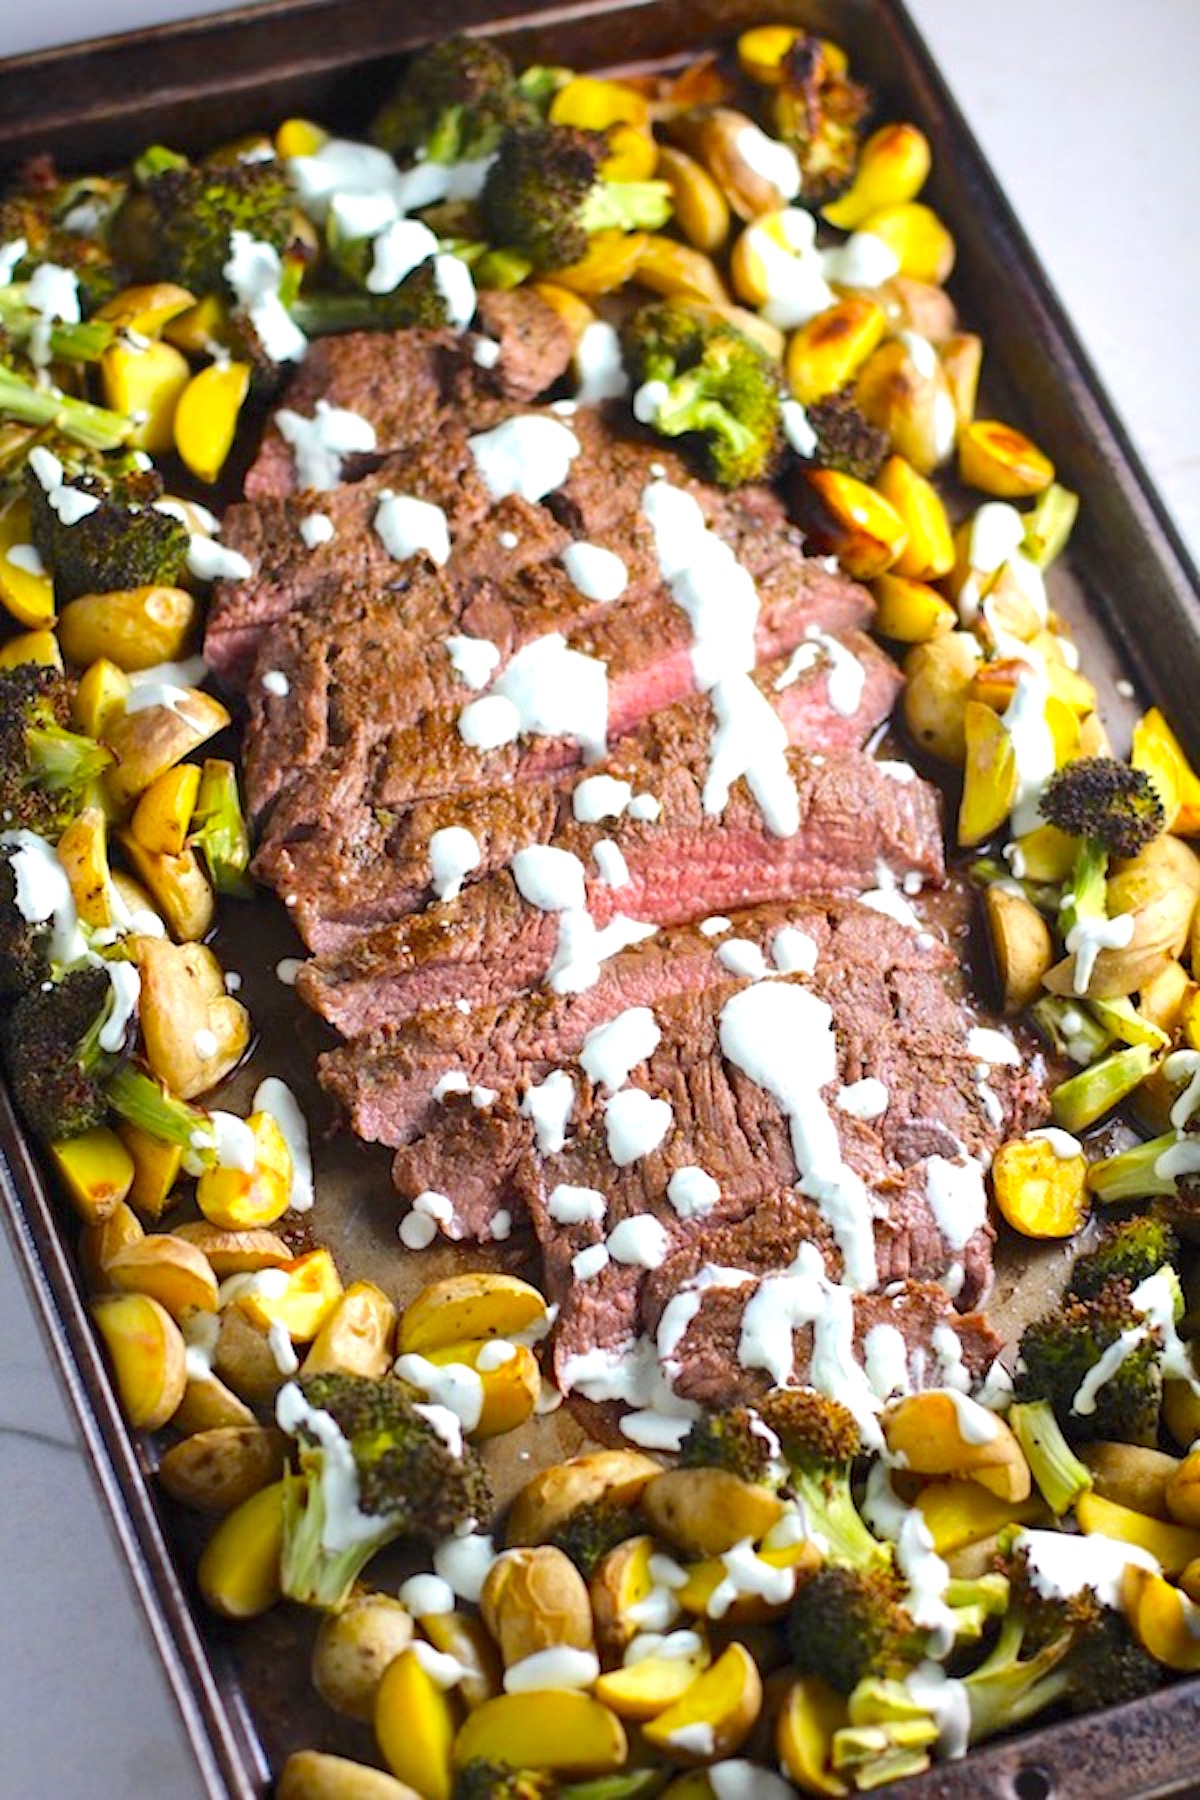 Flank Steak sliced with Potatoes & Broccoli on sheet pan with crema drizzled on top. This Flank Steak Broccoli and Potatoes dinner is an easy and delicious Sheet Pan recipe.